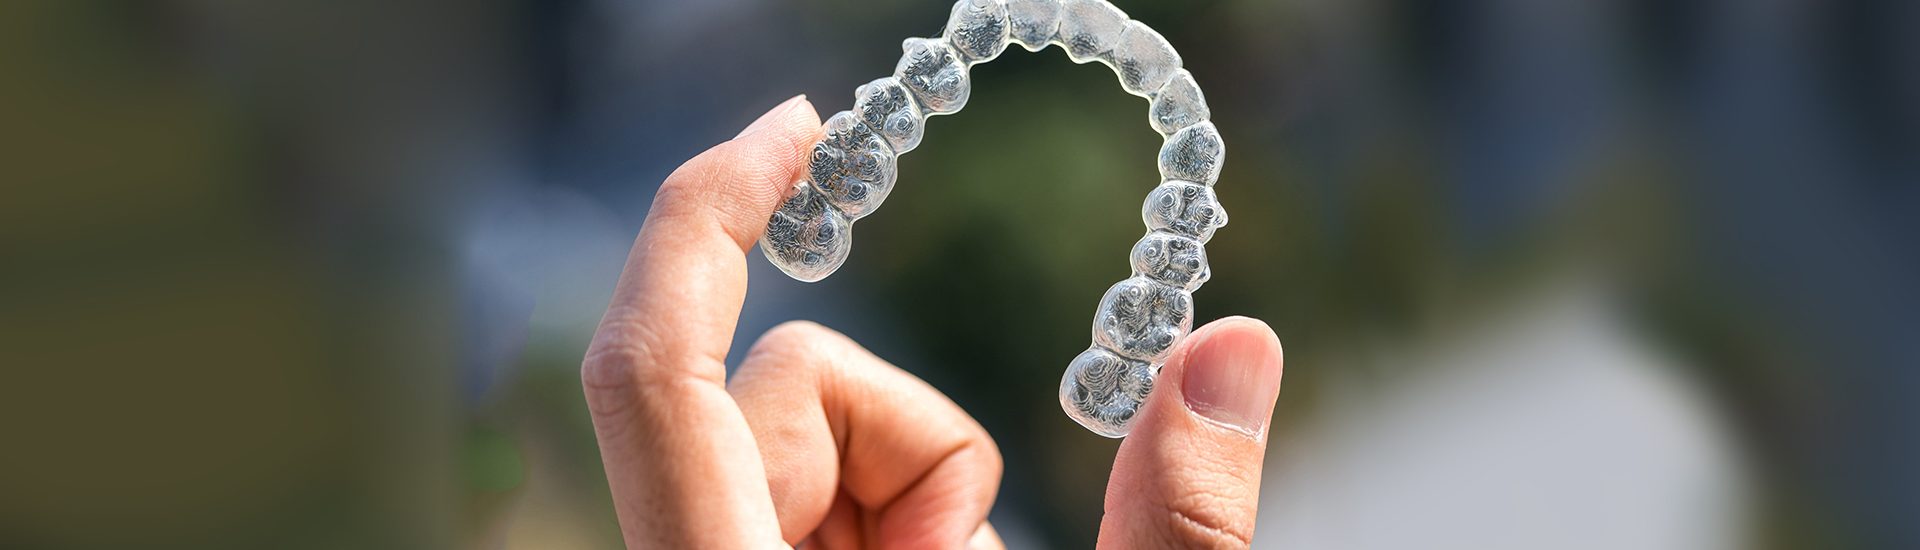 Caring for Your Smile after Invisalign Treatment in Calgary